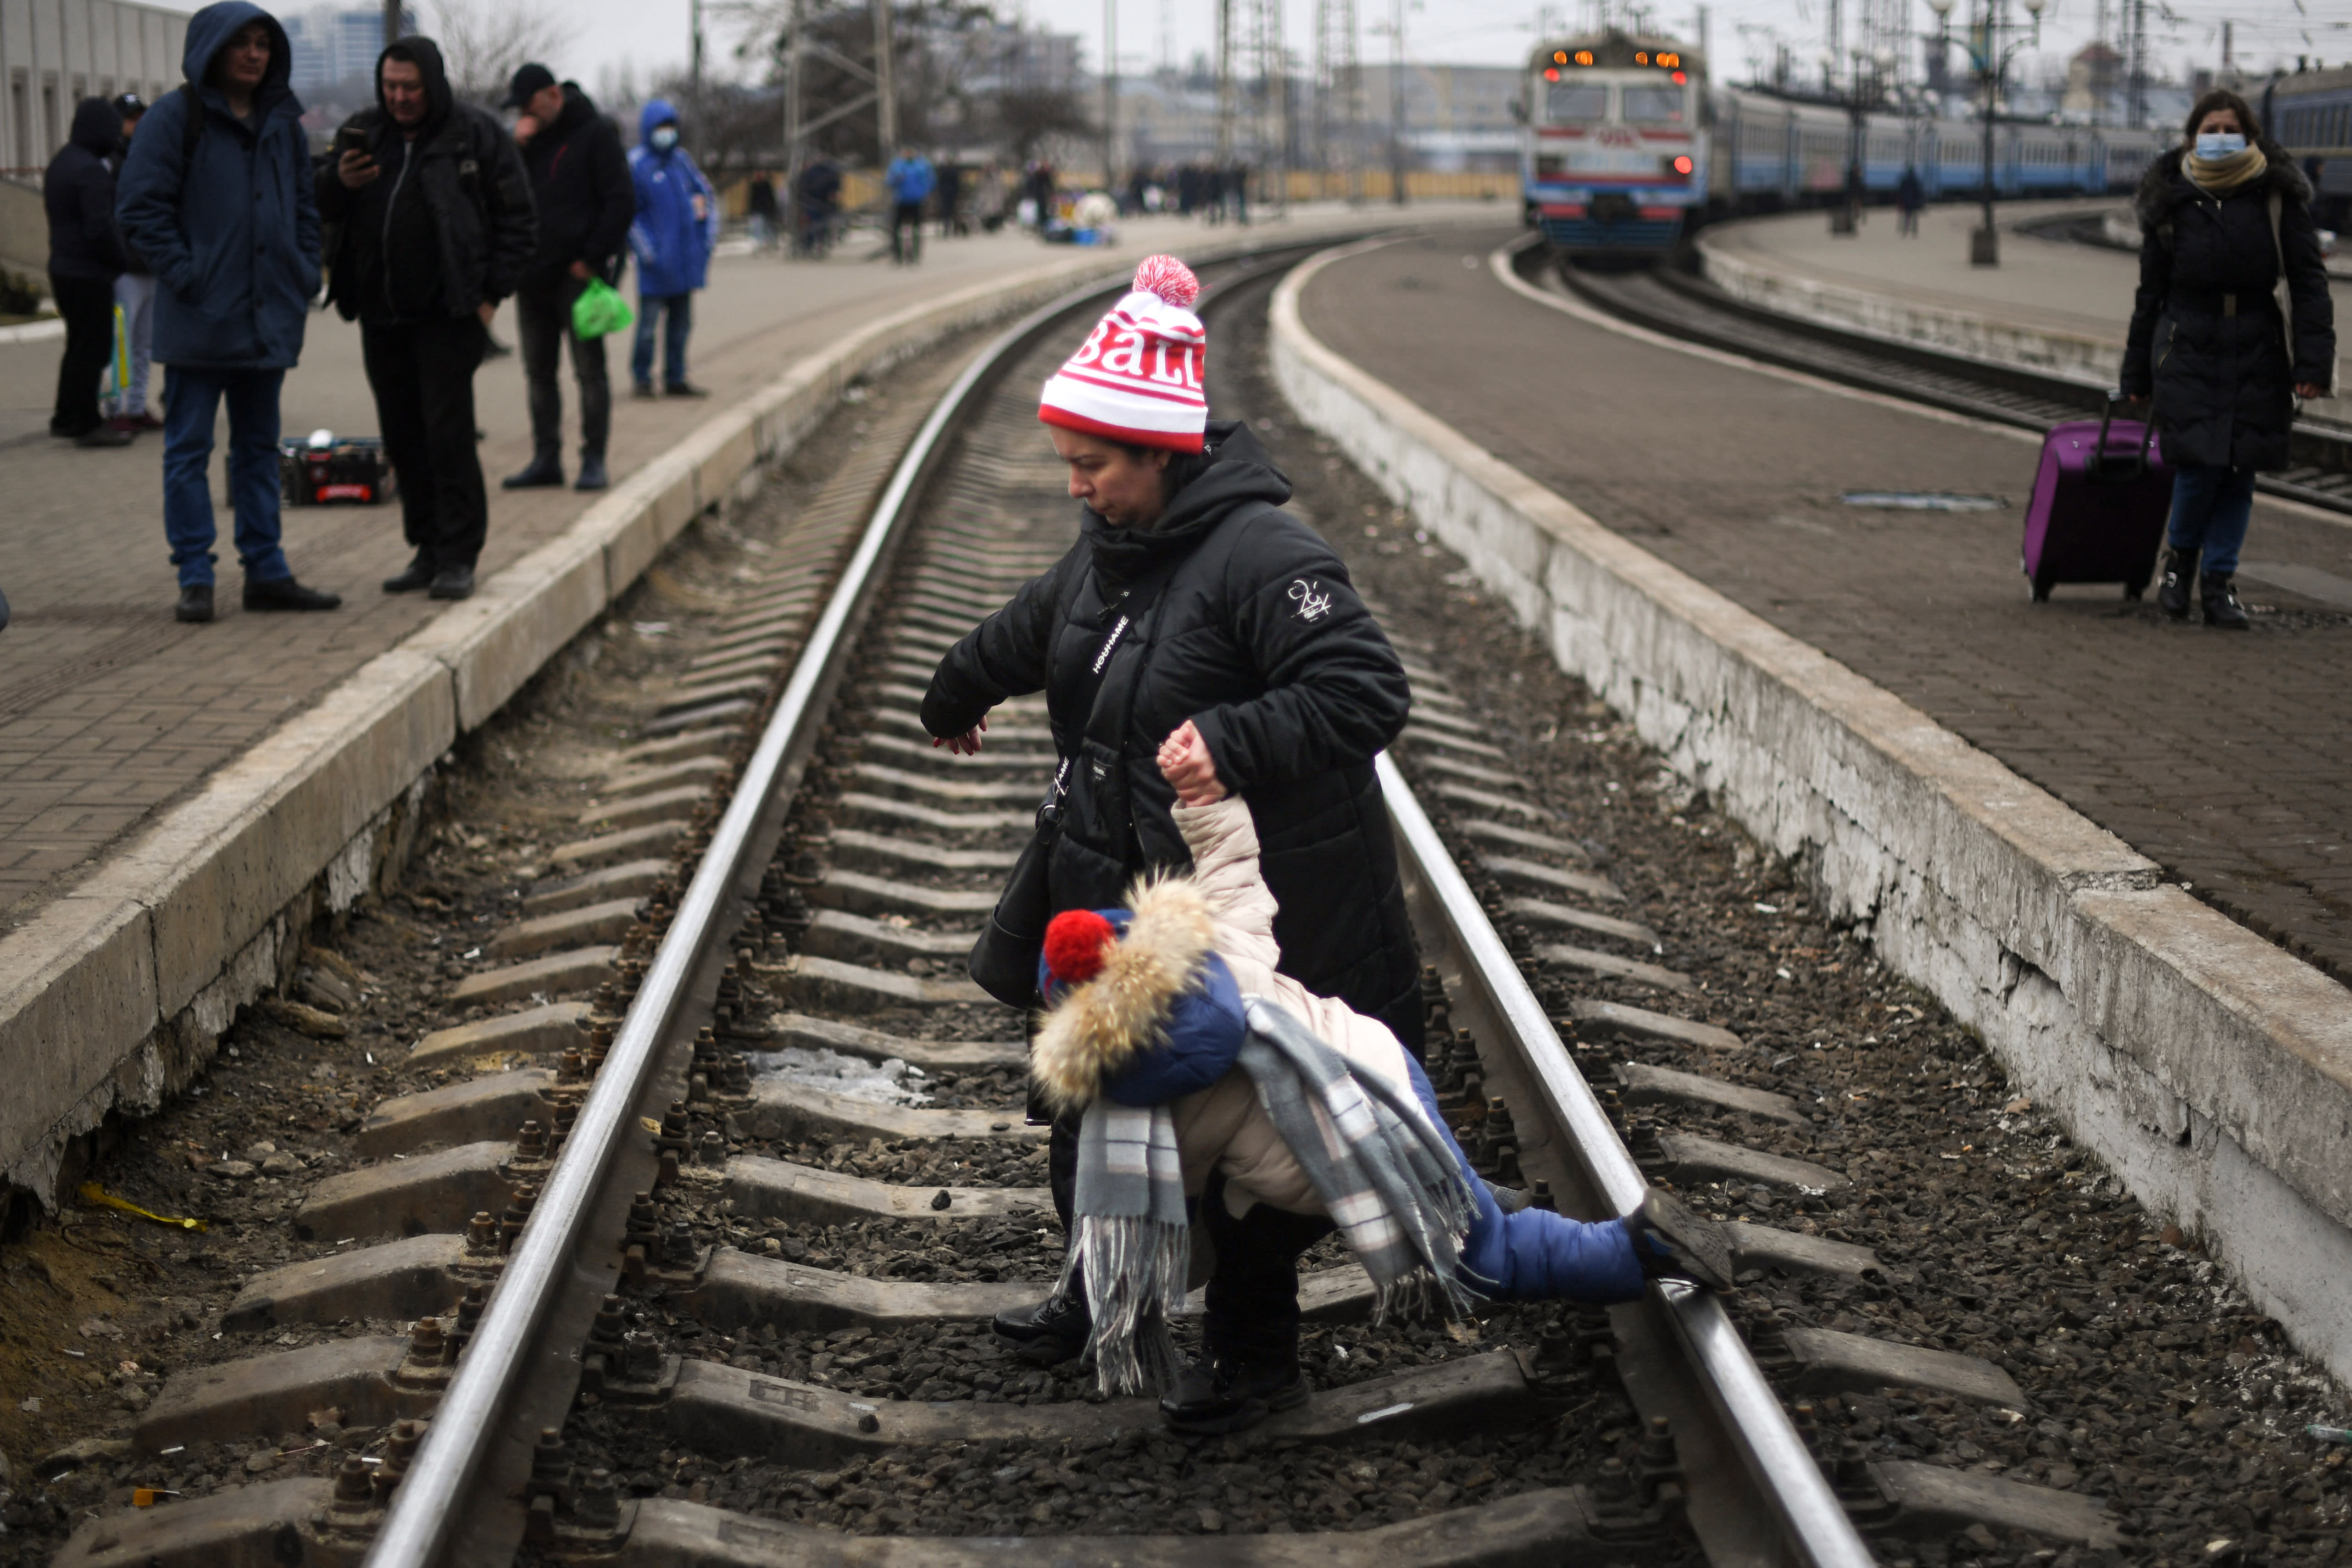 A mother helps a child to cross a railway track at Lviv central train station on March 4, 2022.